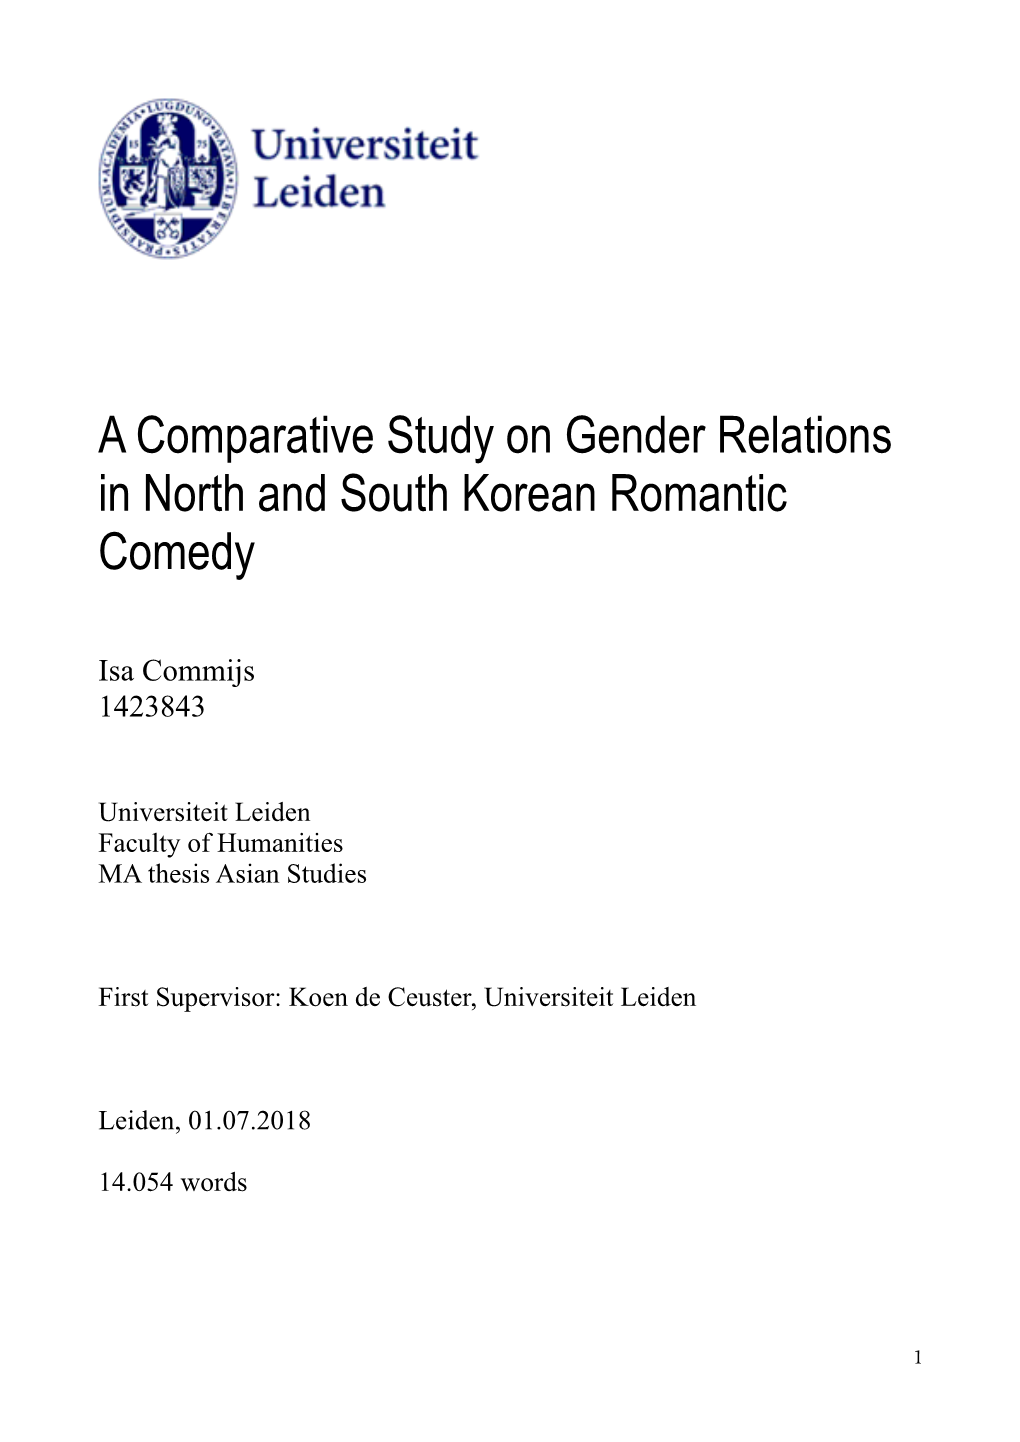 MA Thesis Asian Studies